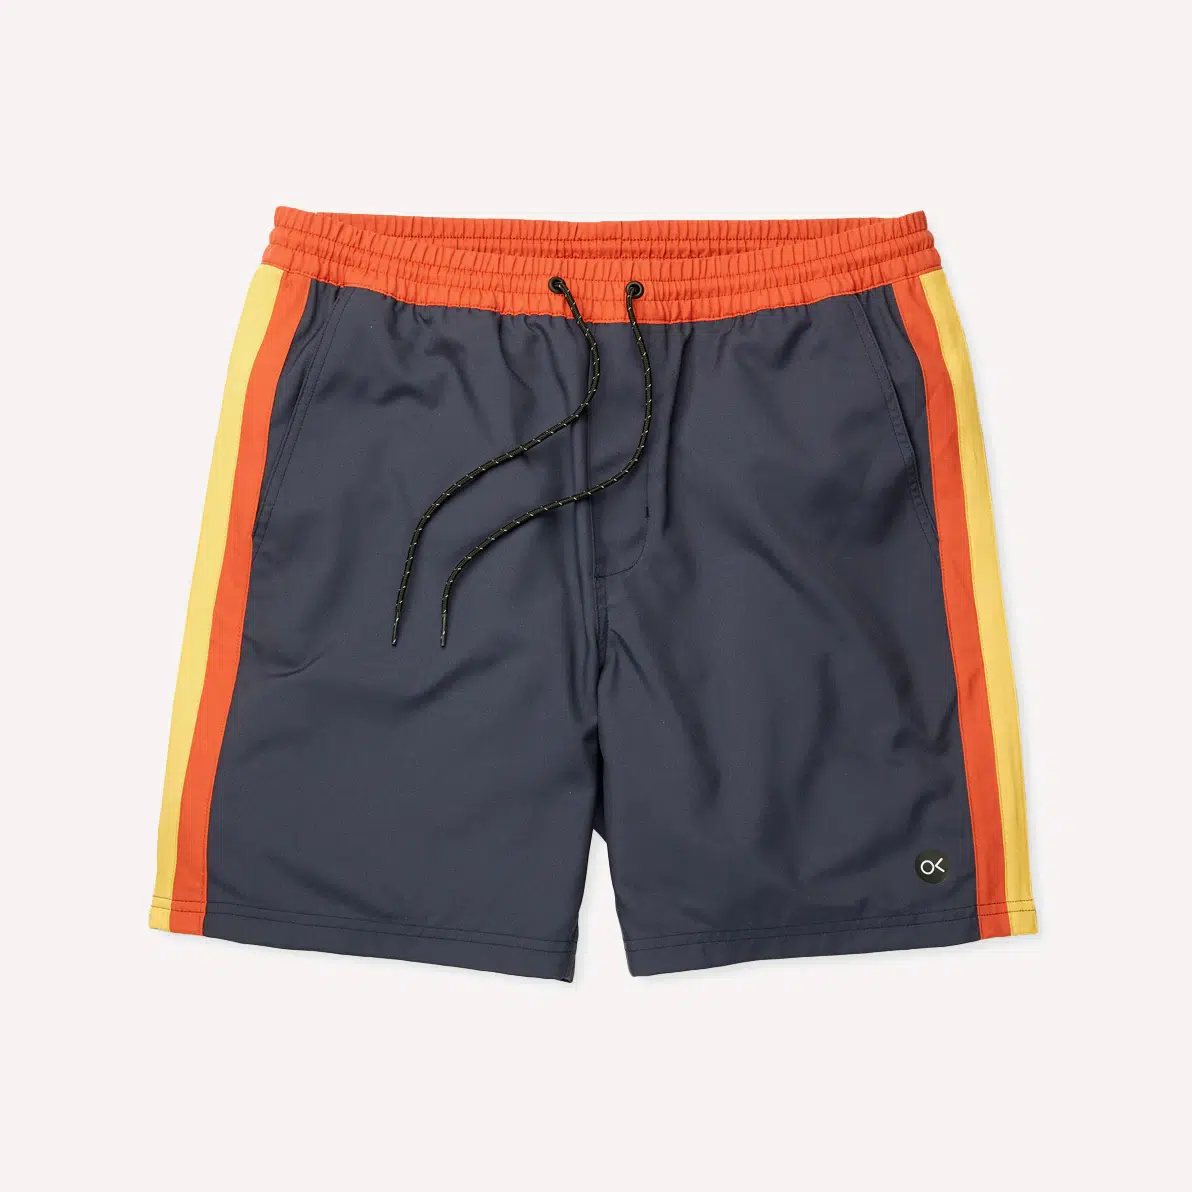 Outerknown nostalgic volley swim trunks